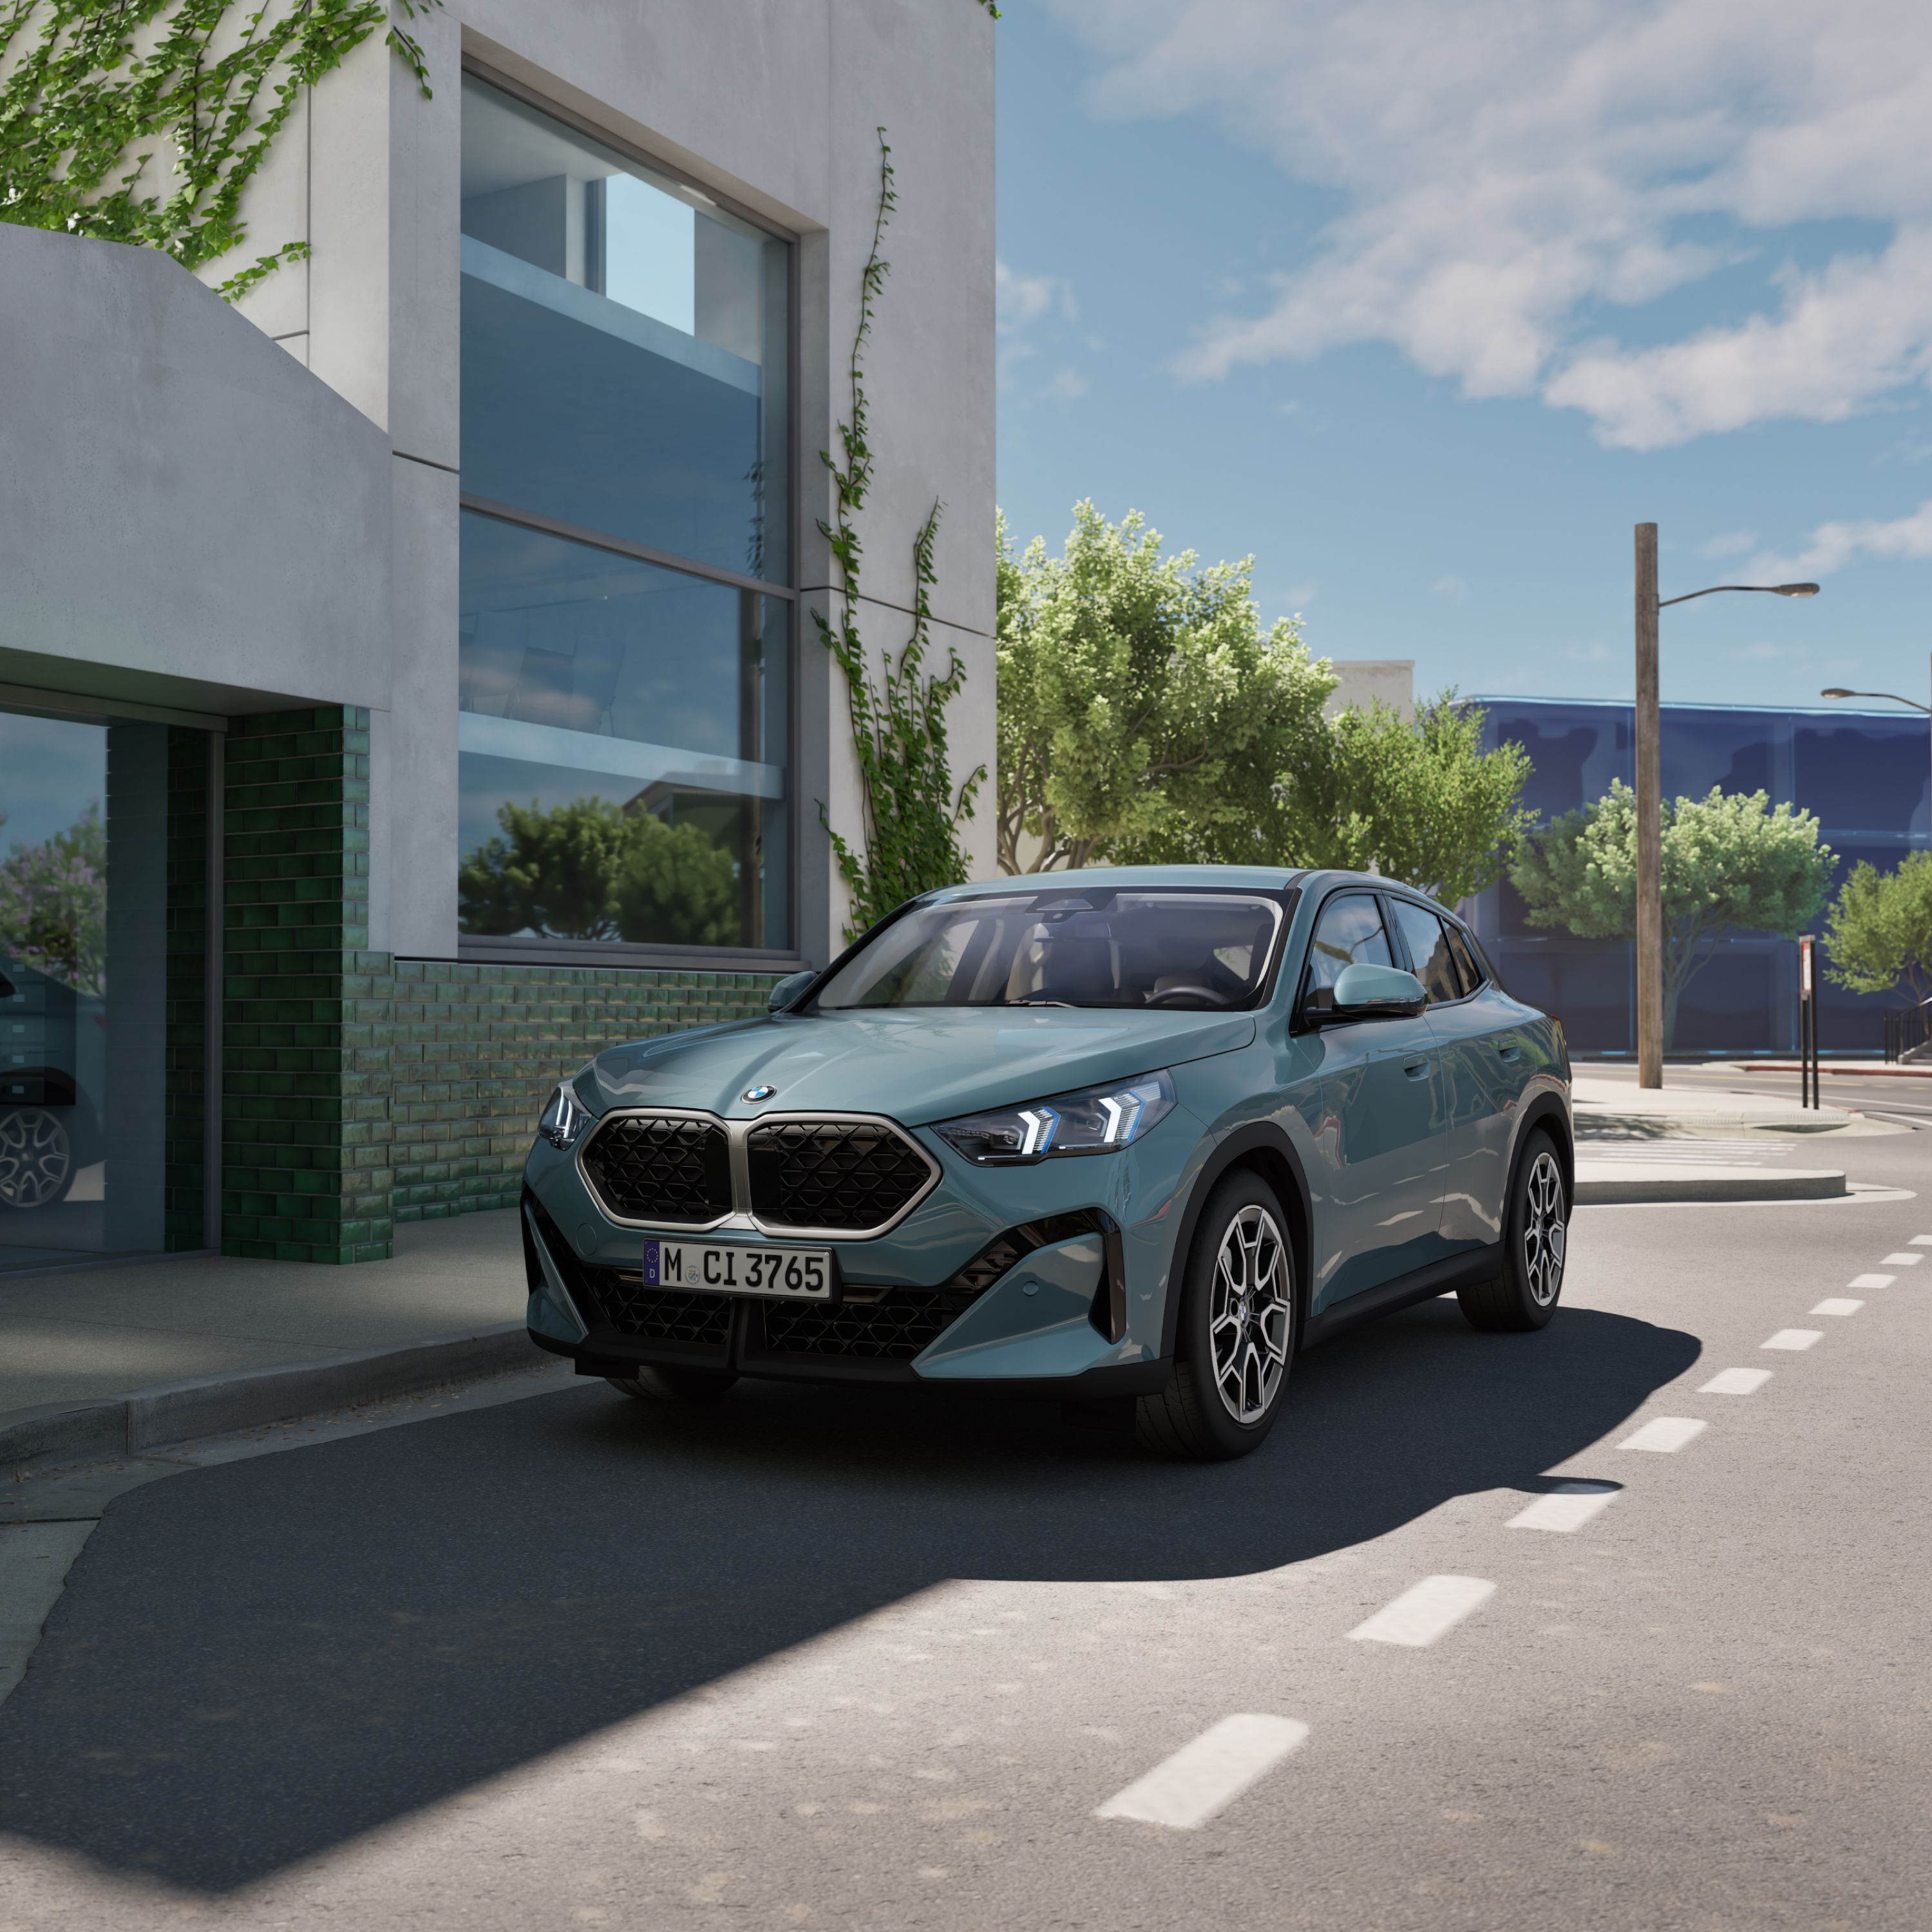 BMW X2 U10 SUV in front of a modern building in the centre of a city